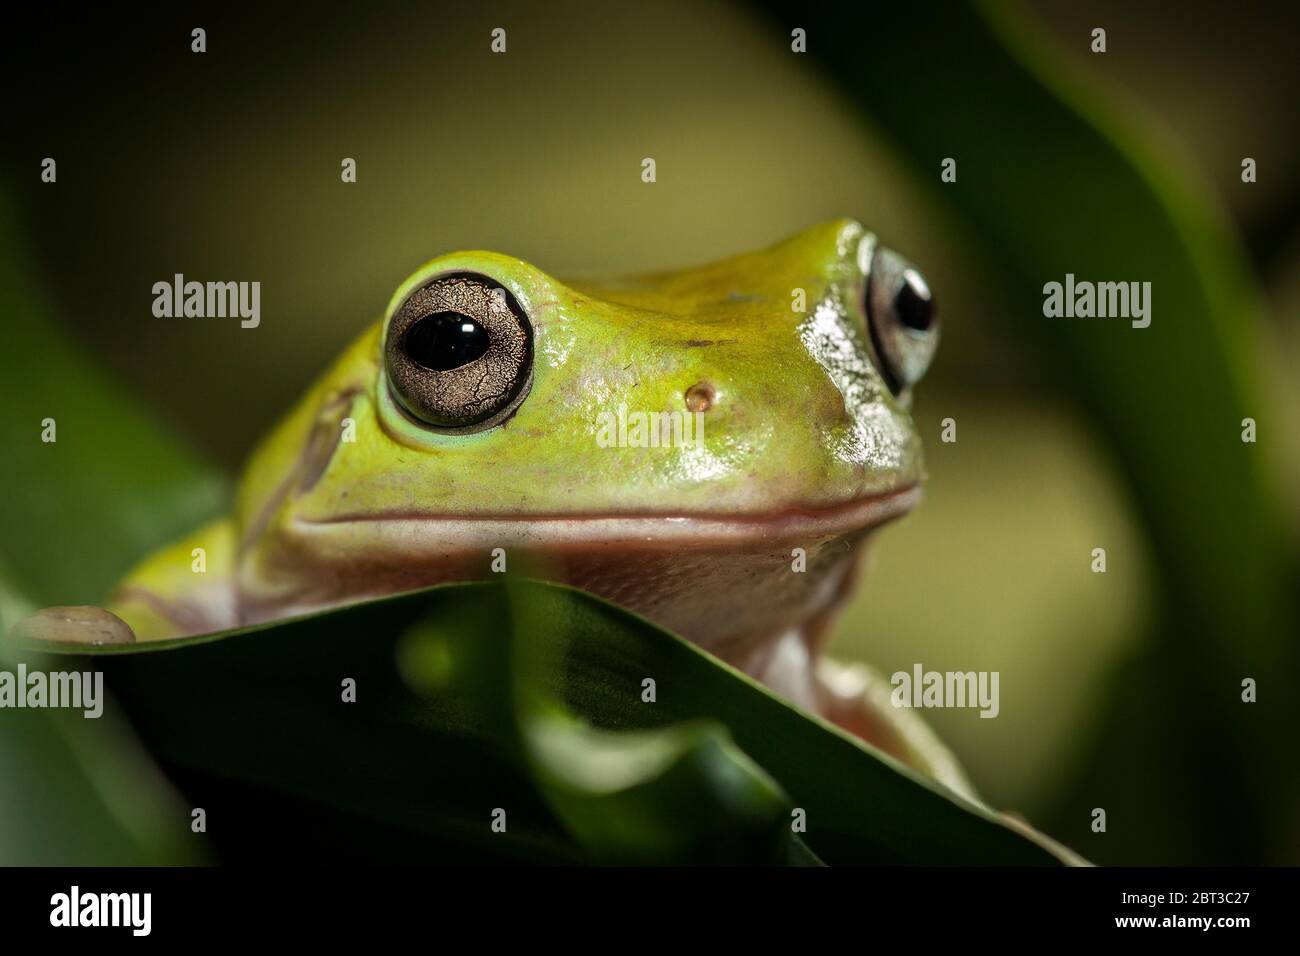 Close-up Portrait of a frog, Indonesia Stock Photo